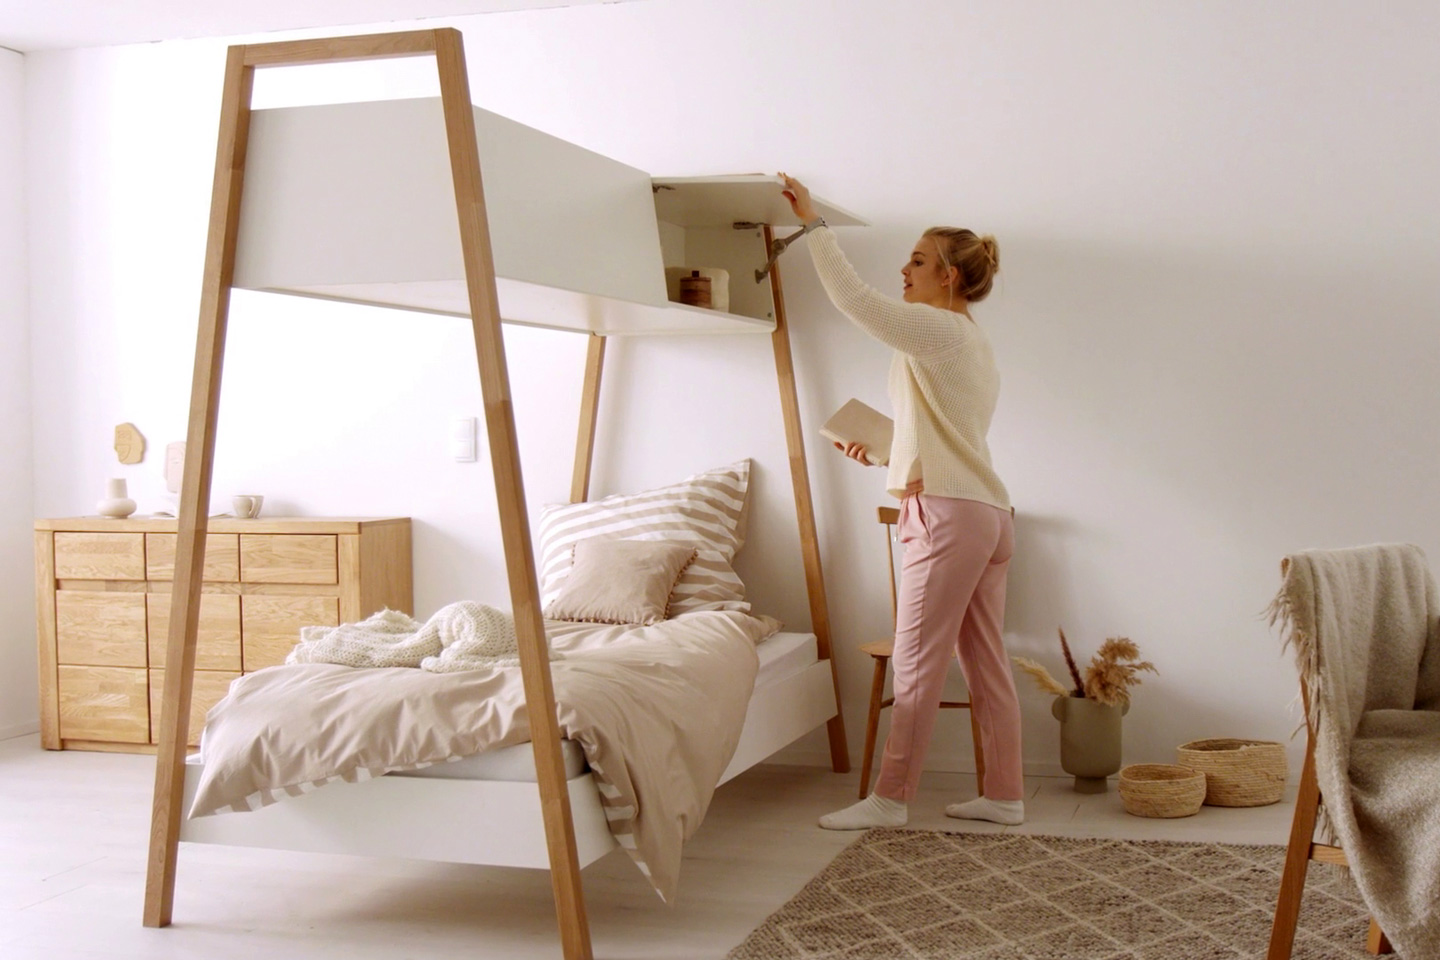 This crafty little bed comes with overhead storage… just like on an airplane!